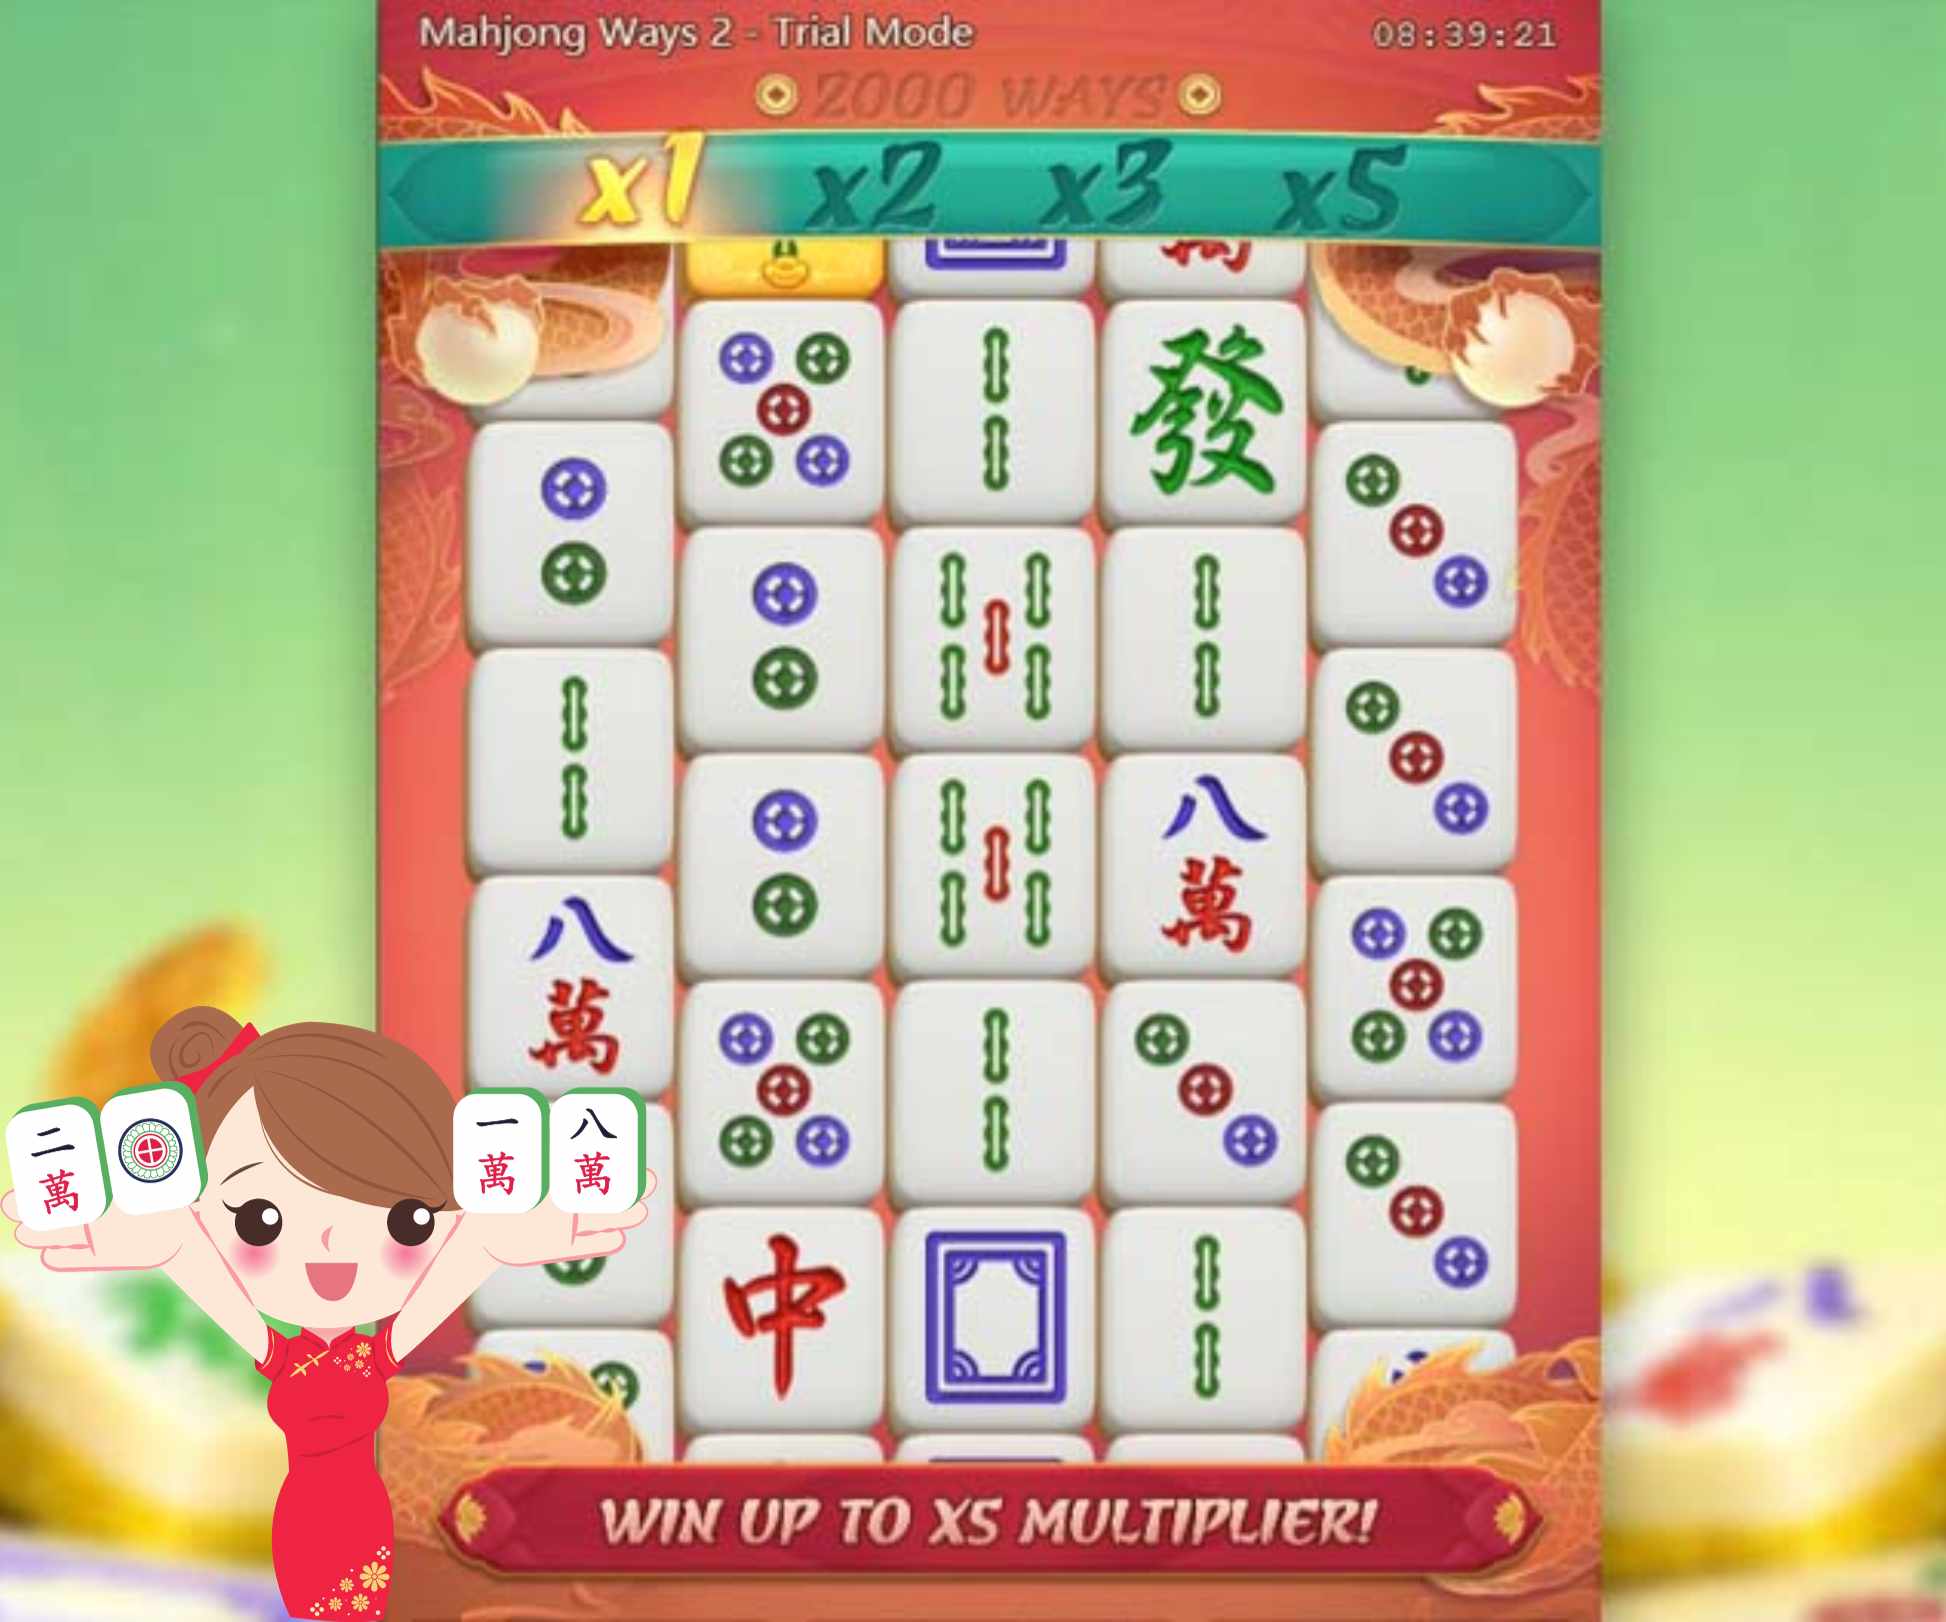 Mahjong slot are an inseparable part of life